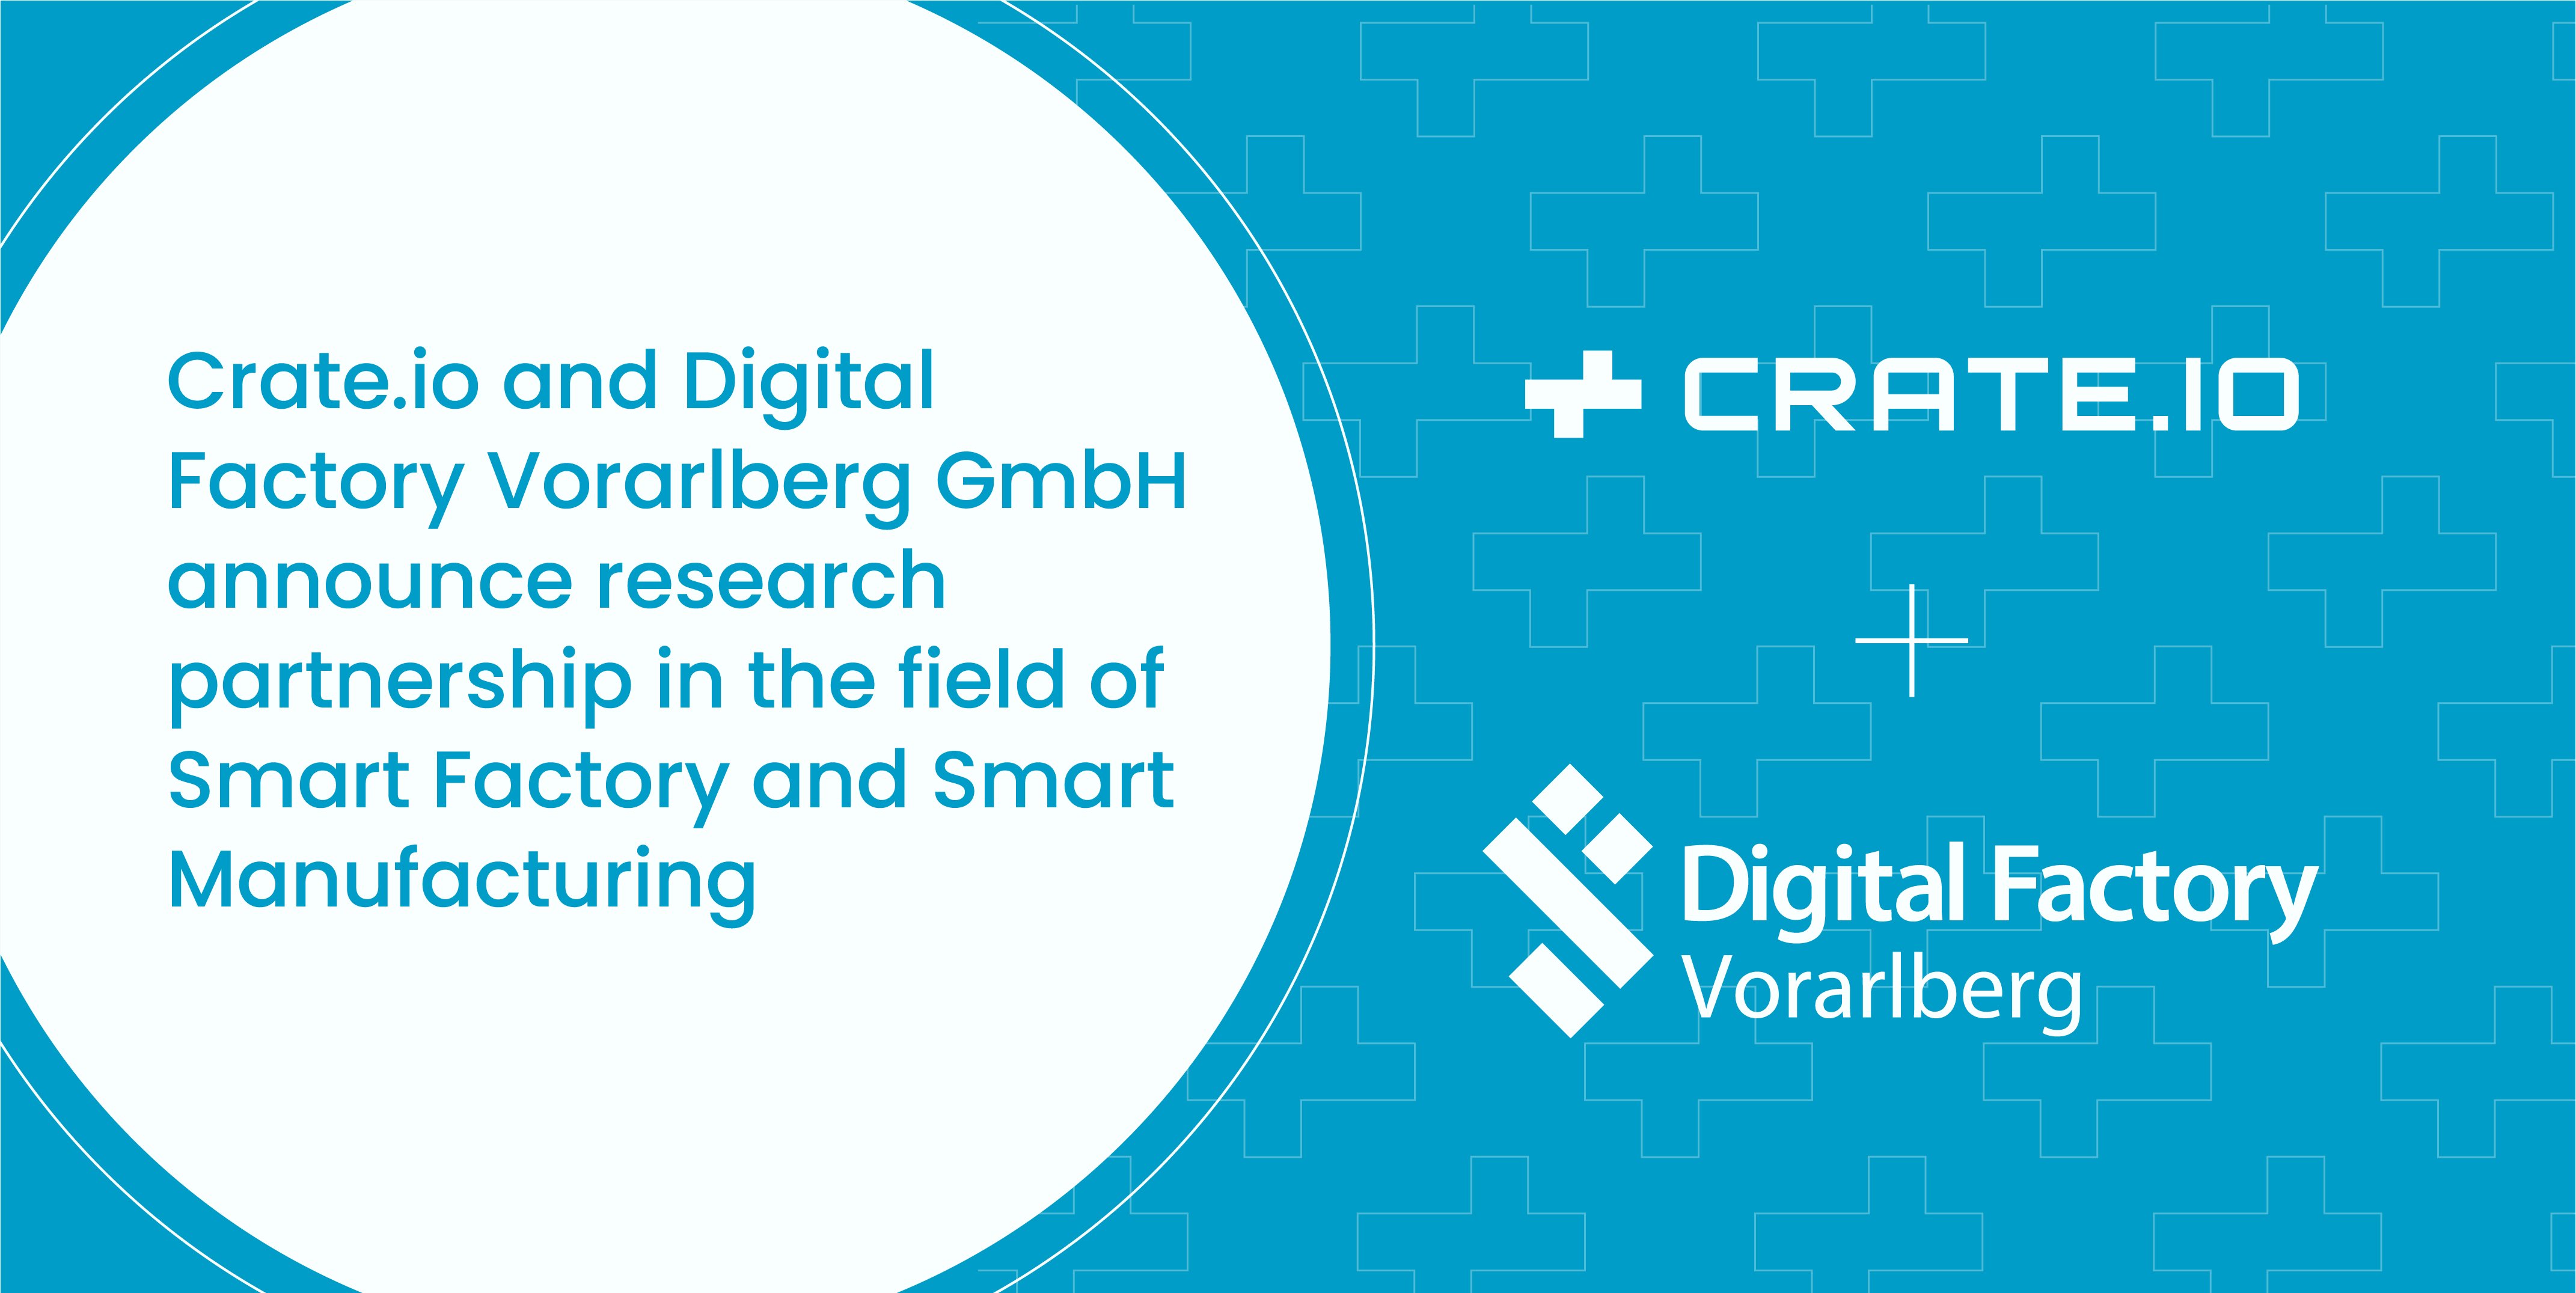 Crate.io and Digital Factory Vorarlberg GmbH announce research partnership in the field of Smart Factory and Smart Manufacturing